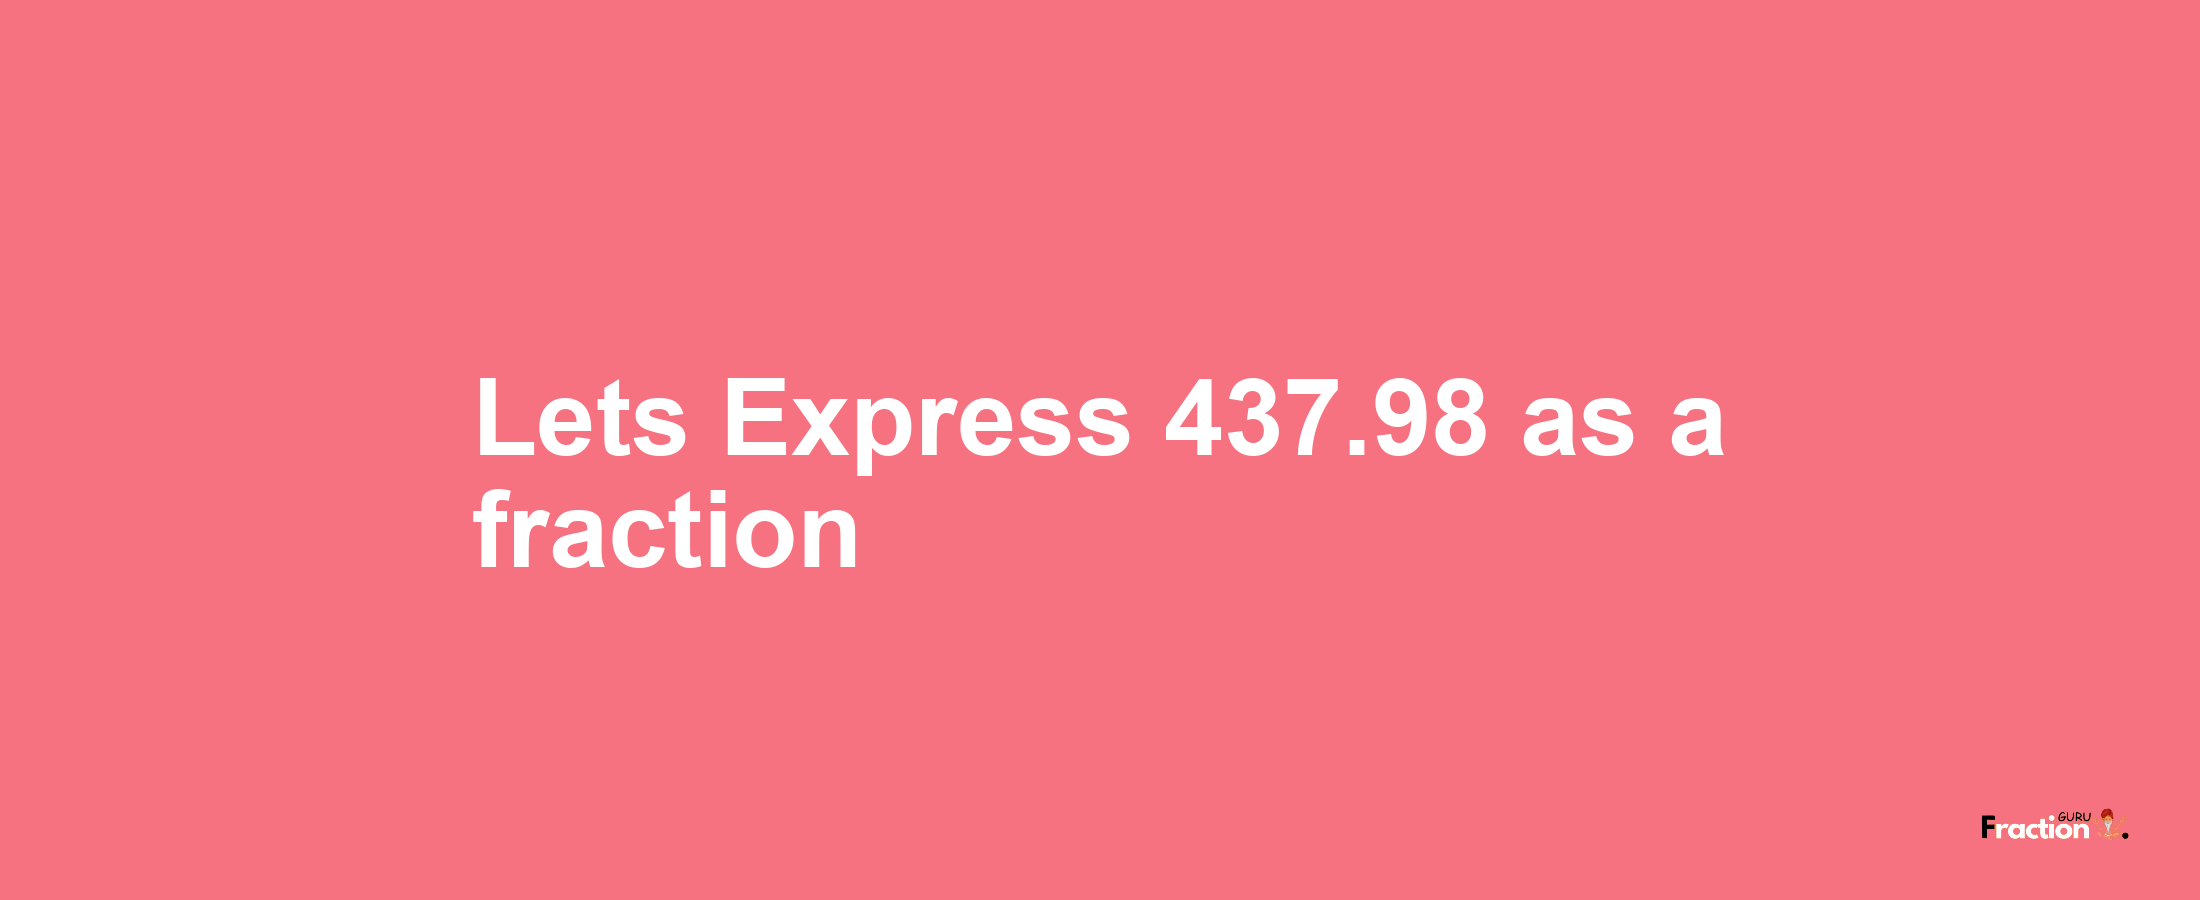 Lets Express 437.98 as afraction